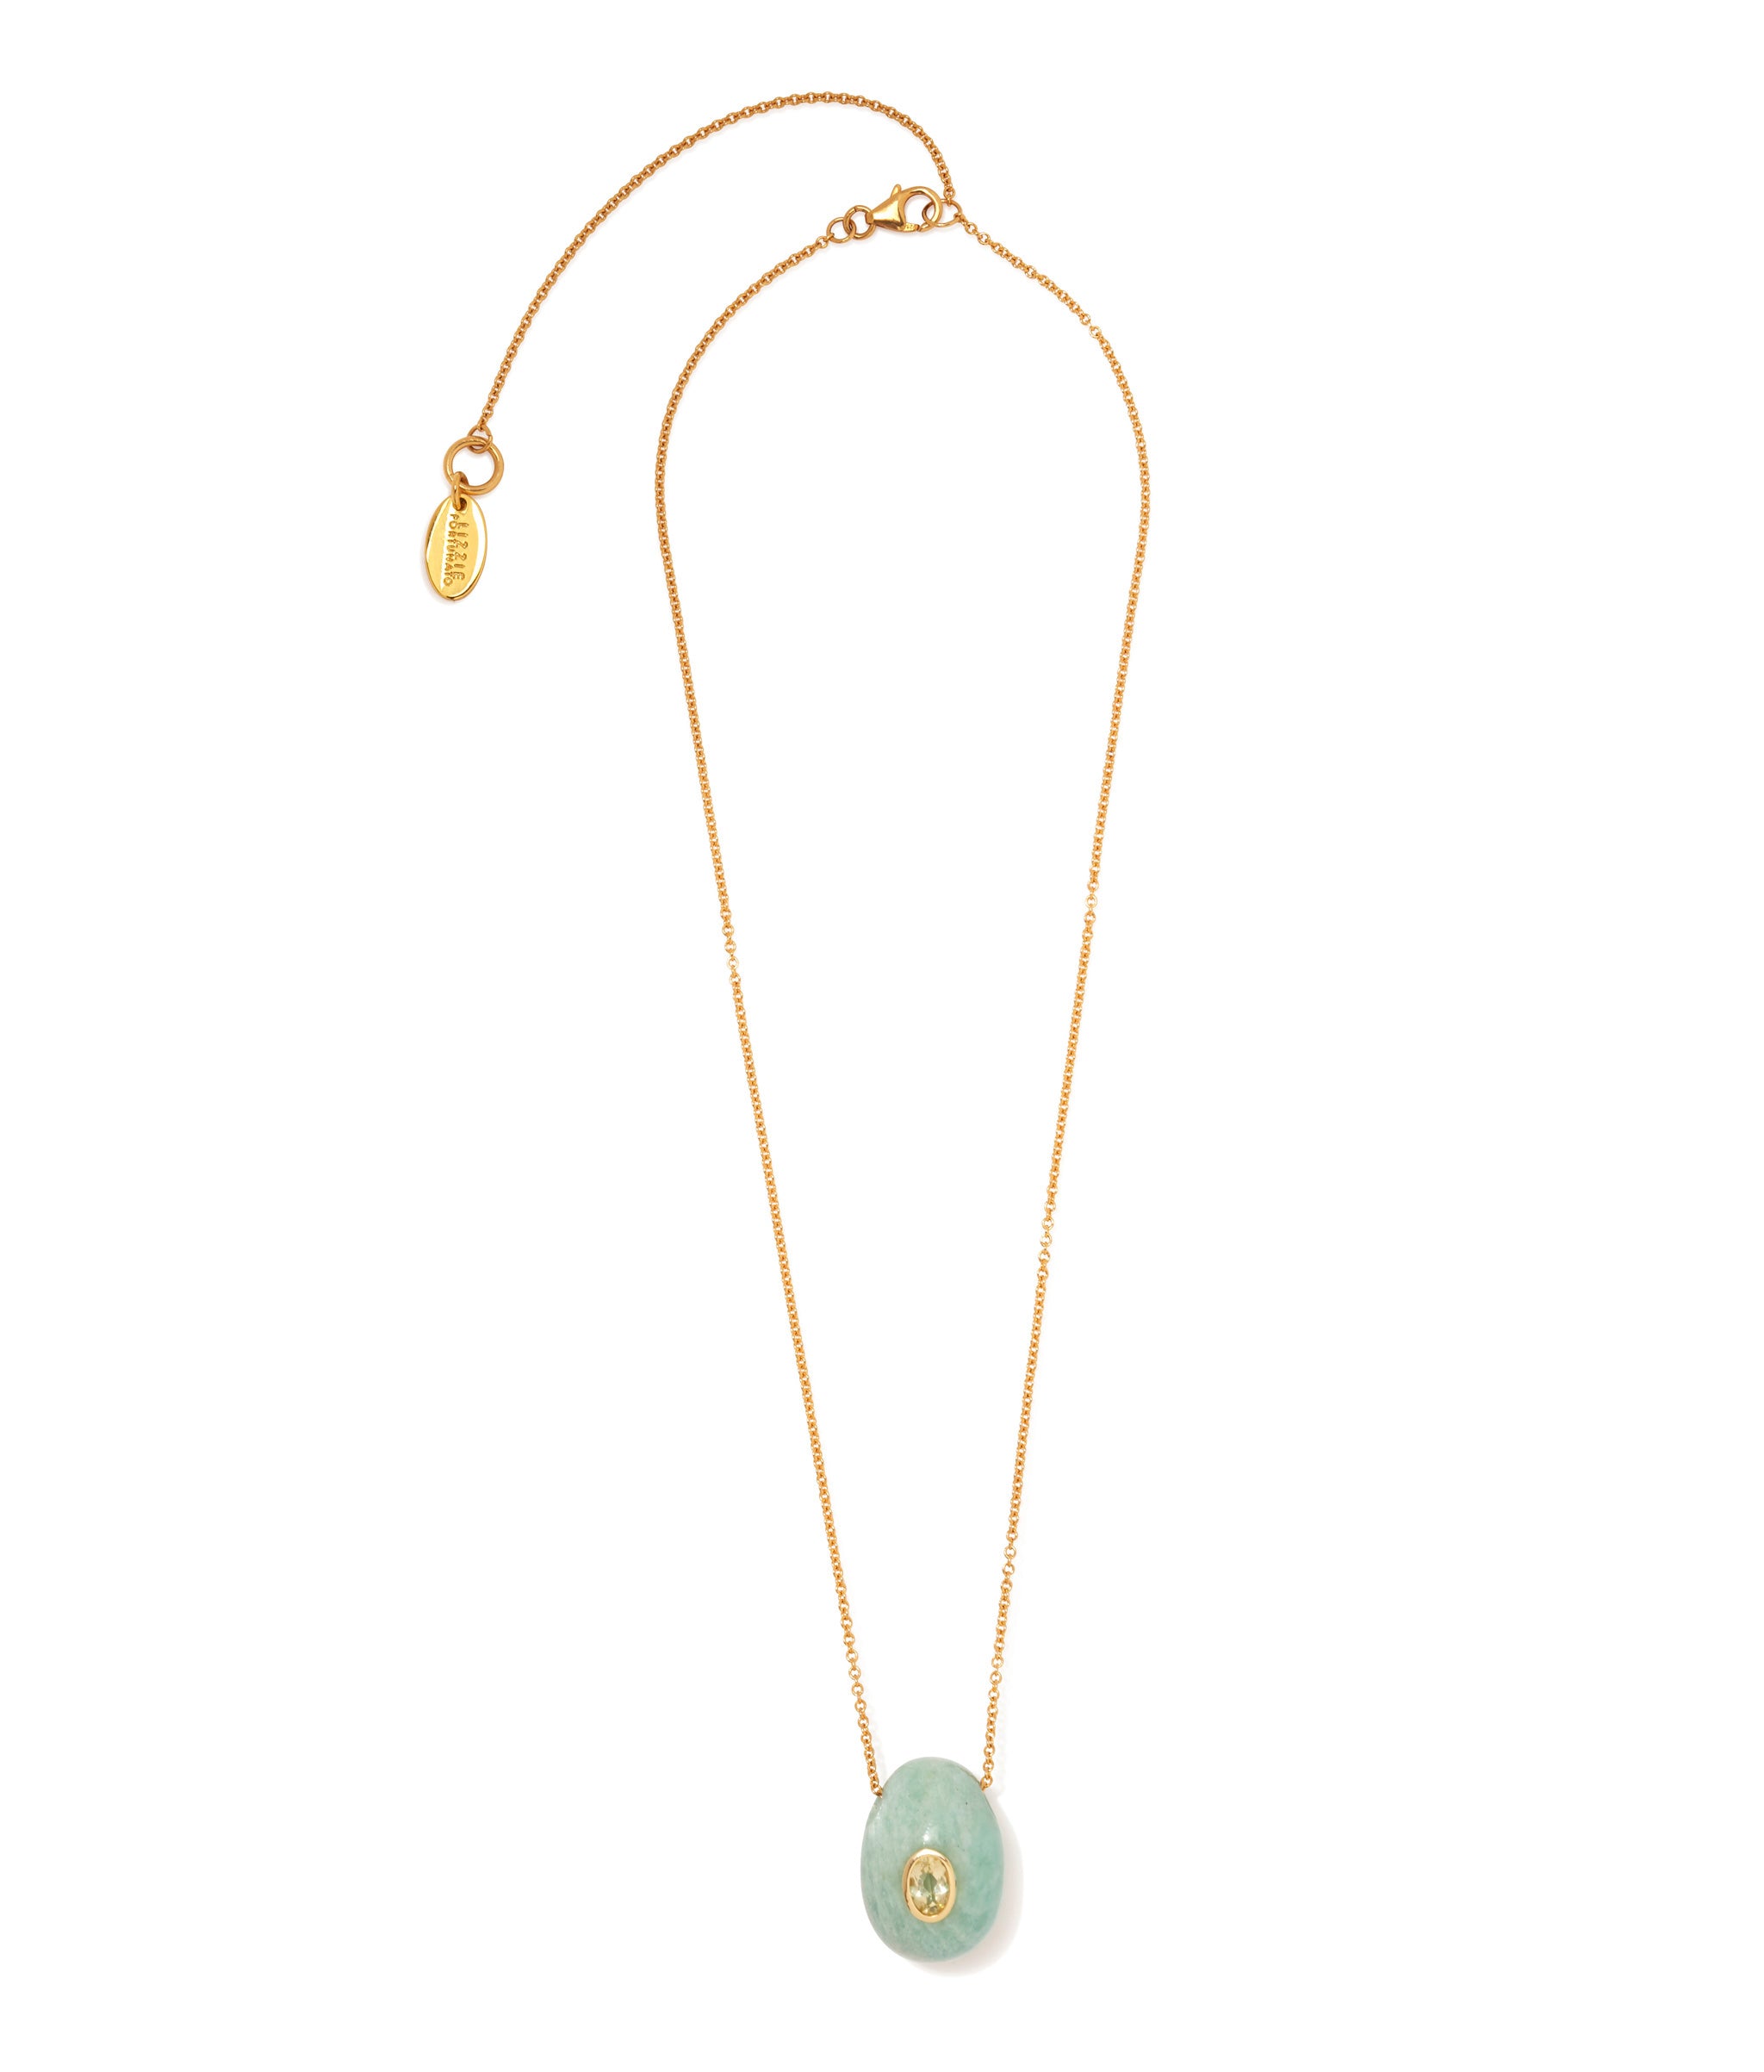 Constance Necklace in Amazonite. Gold-plated sterling silver chain necklace with amazonite egg pendant with lemon quartz